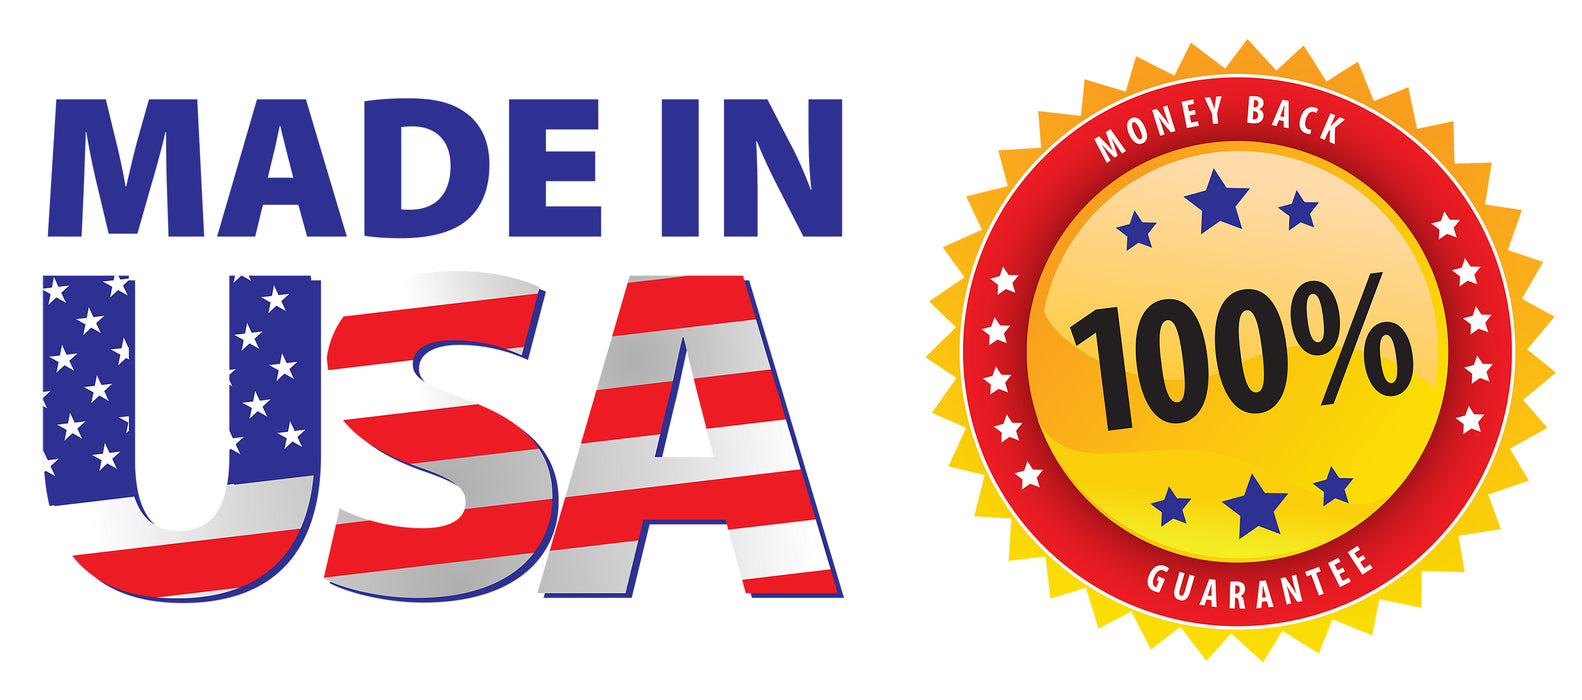 Made in the USA - Money Back Guarantee